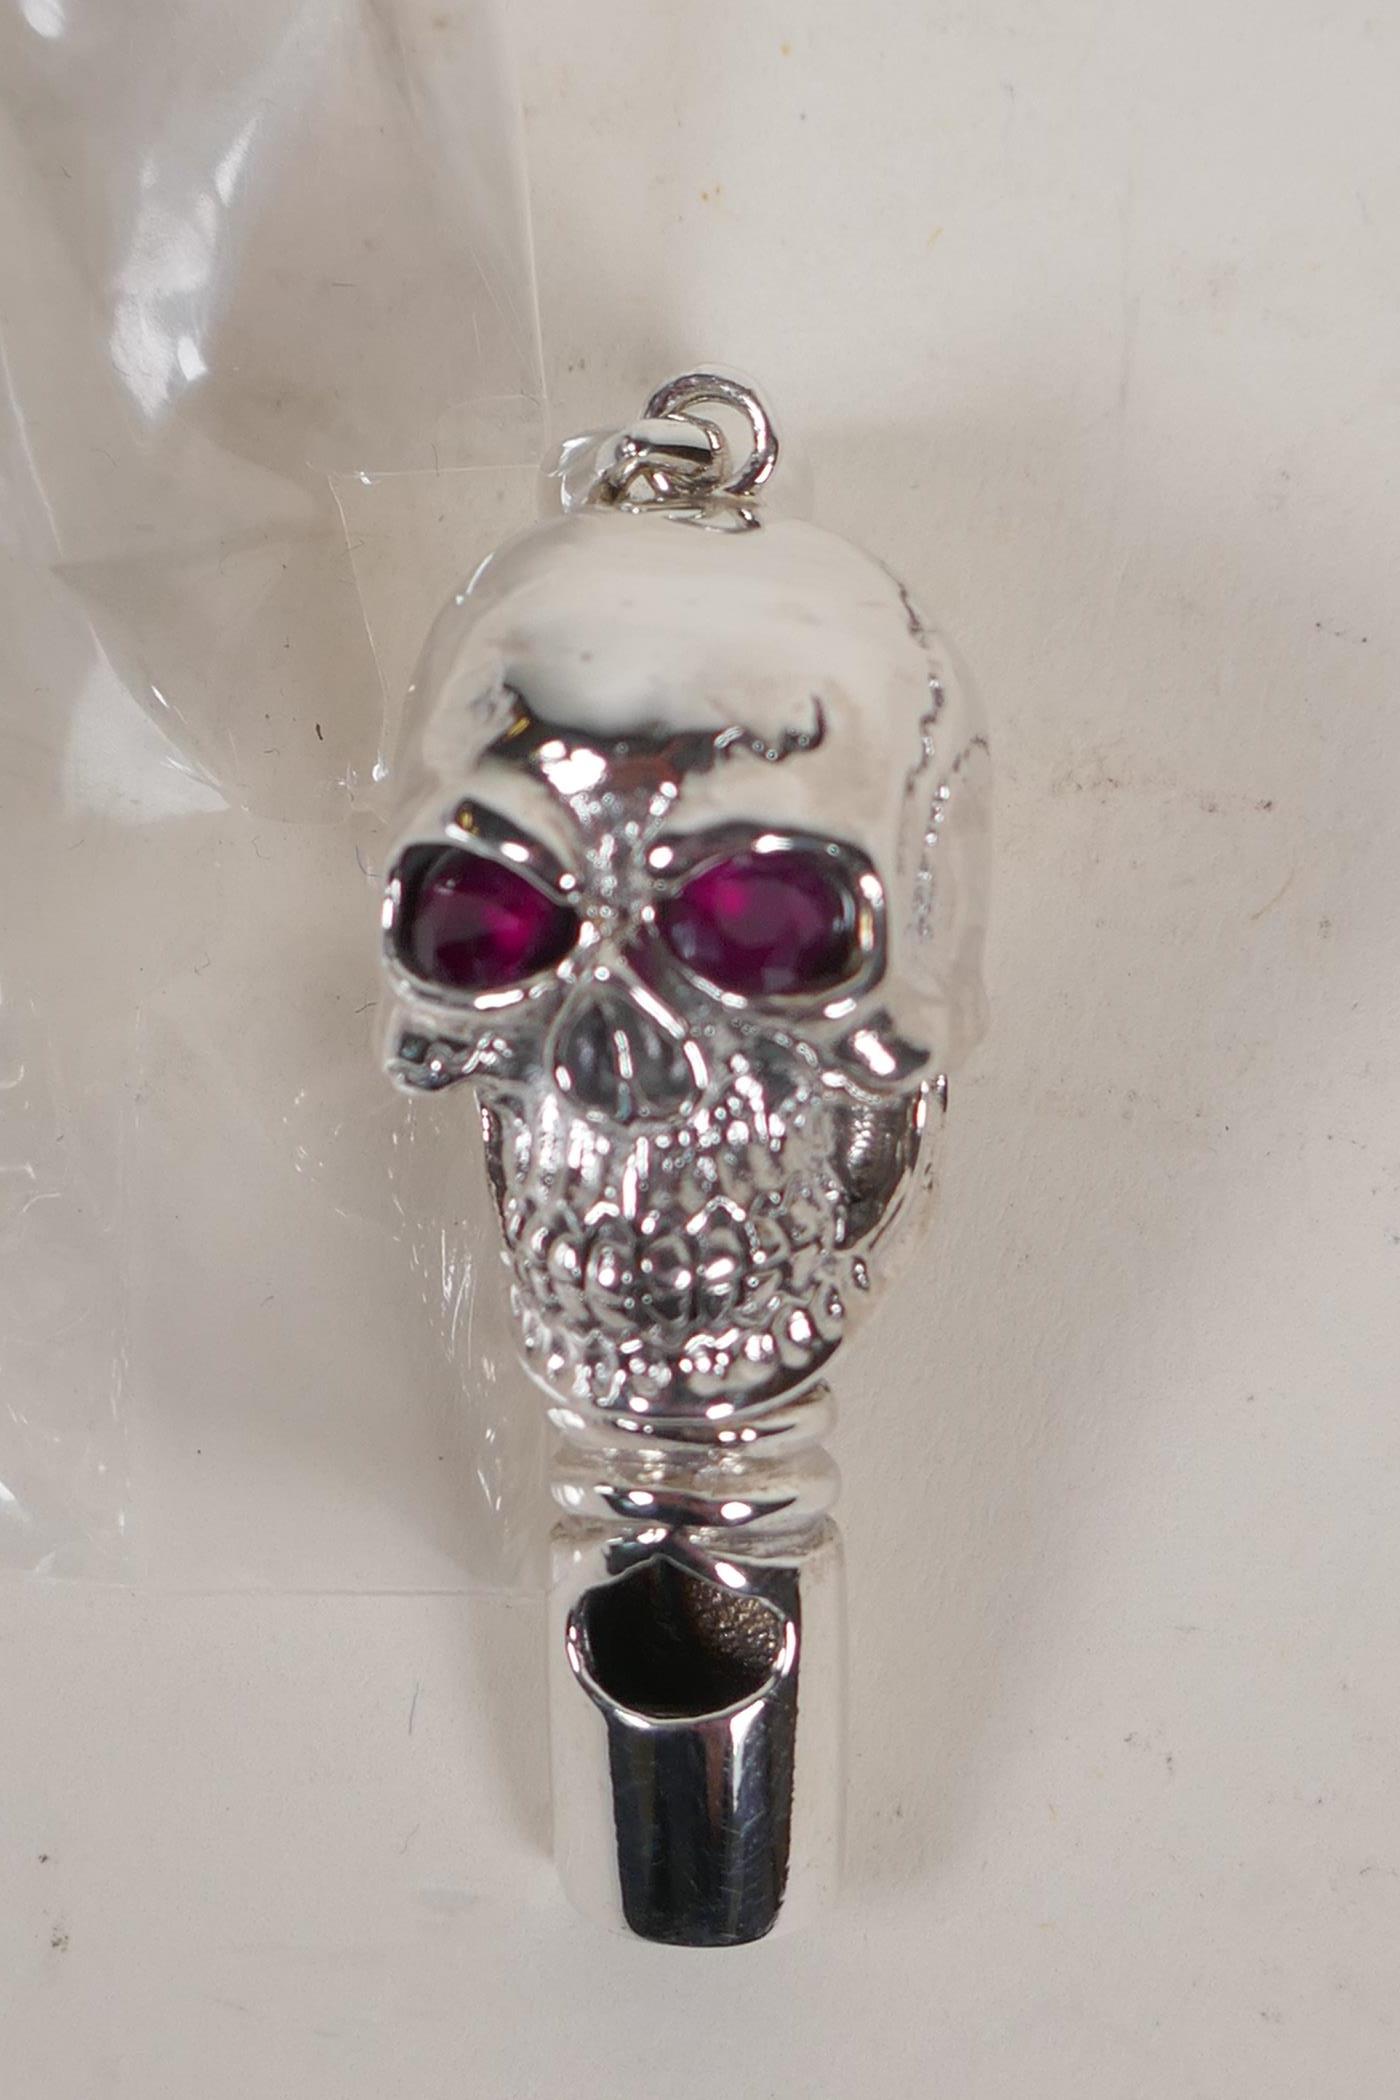 A sterling silver whistle modelled as a skull with ruby eyes - Image 3 of 4